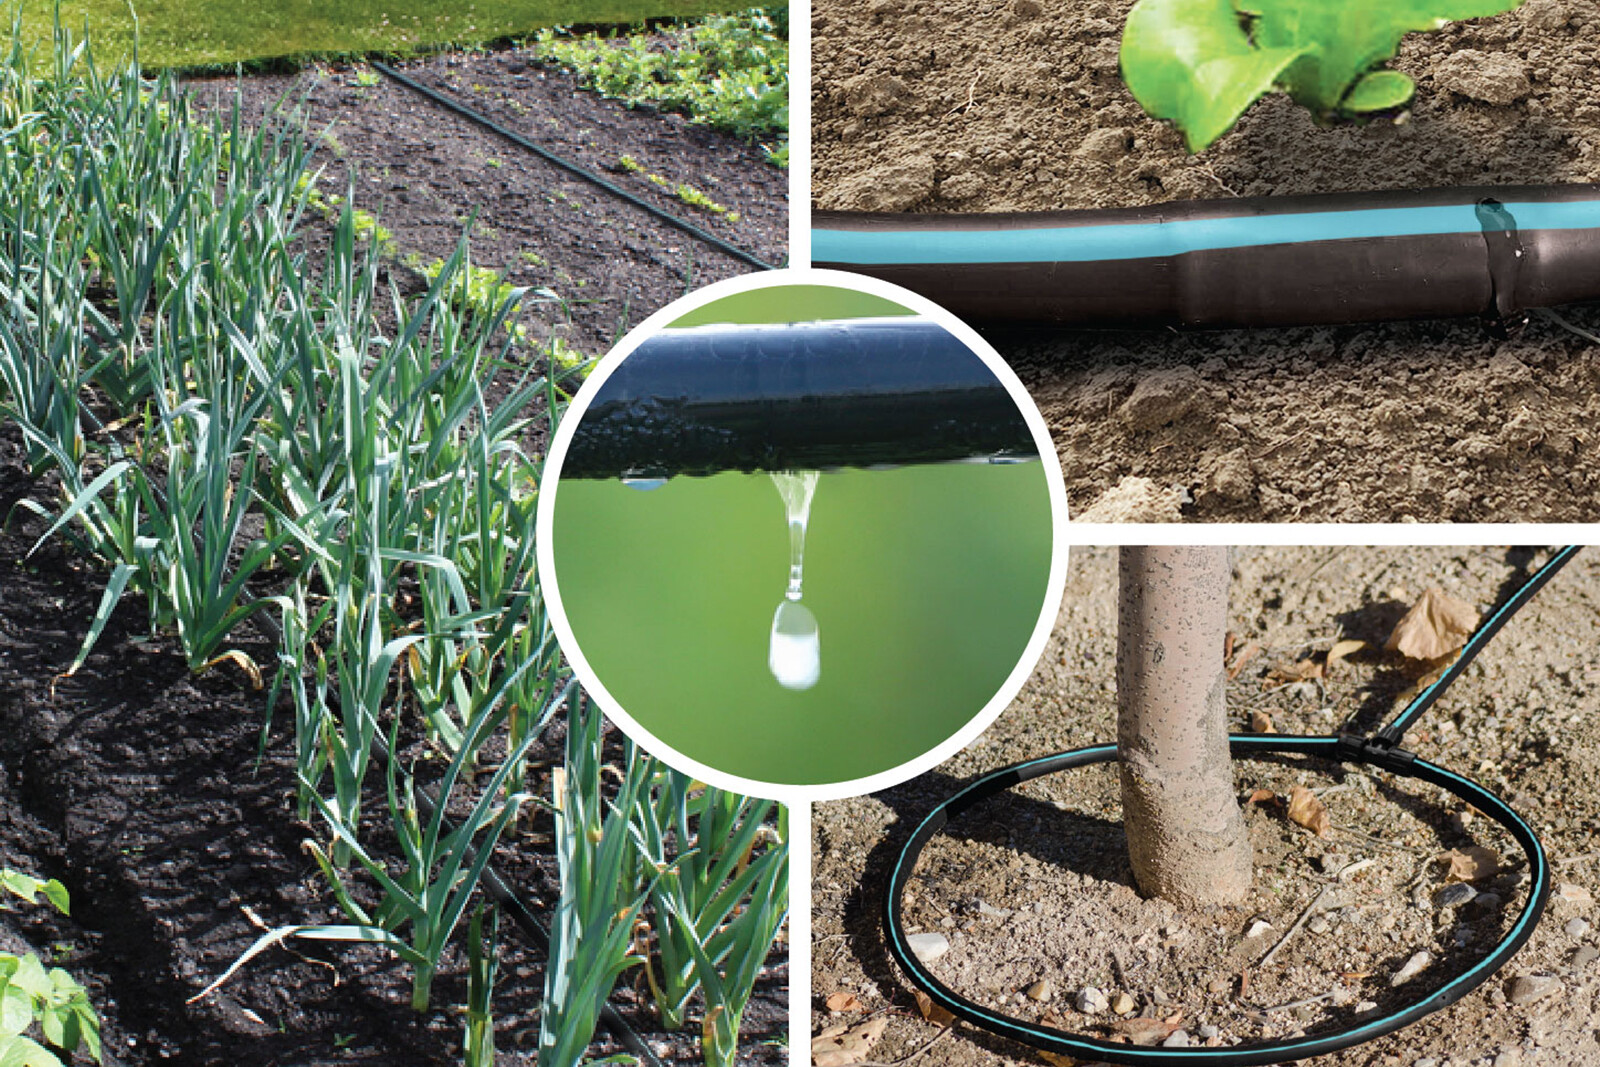 Mircro irrigation tubing being used in in a garden